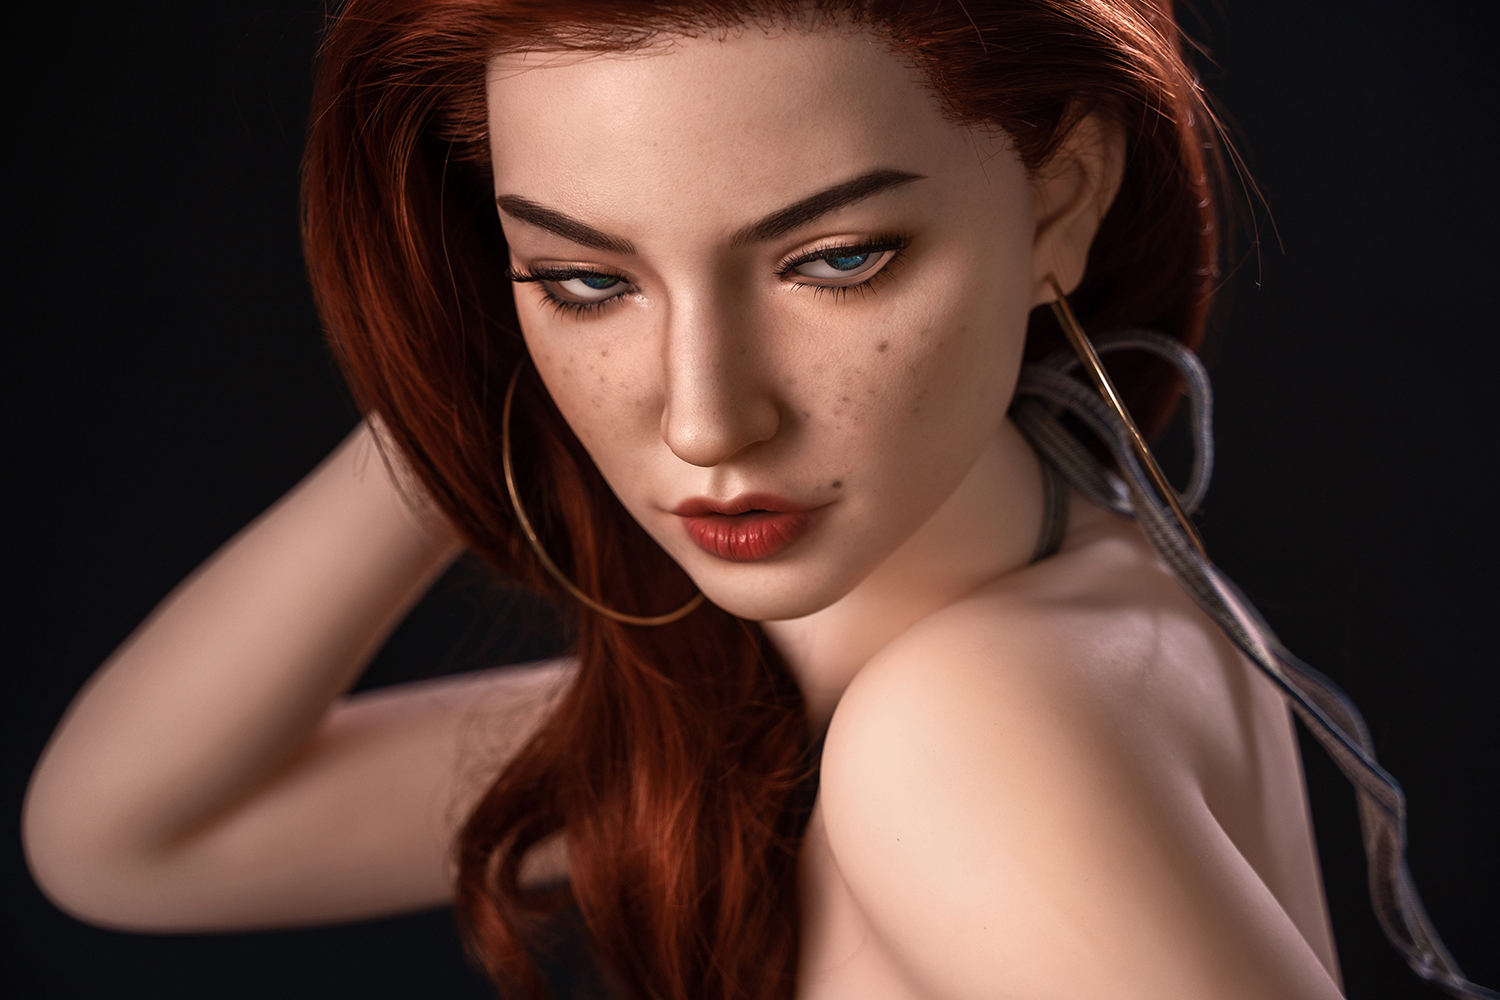 Sexdoll Jacqueline - silicone head with moveable jaw